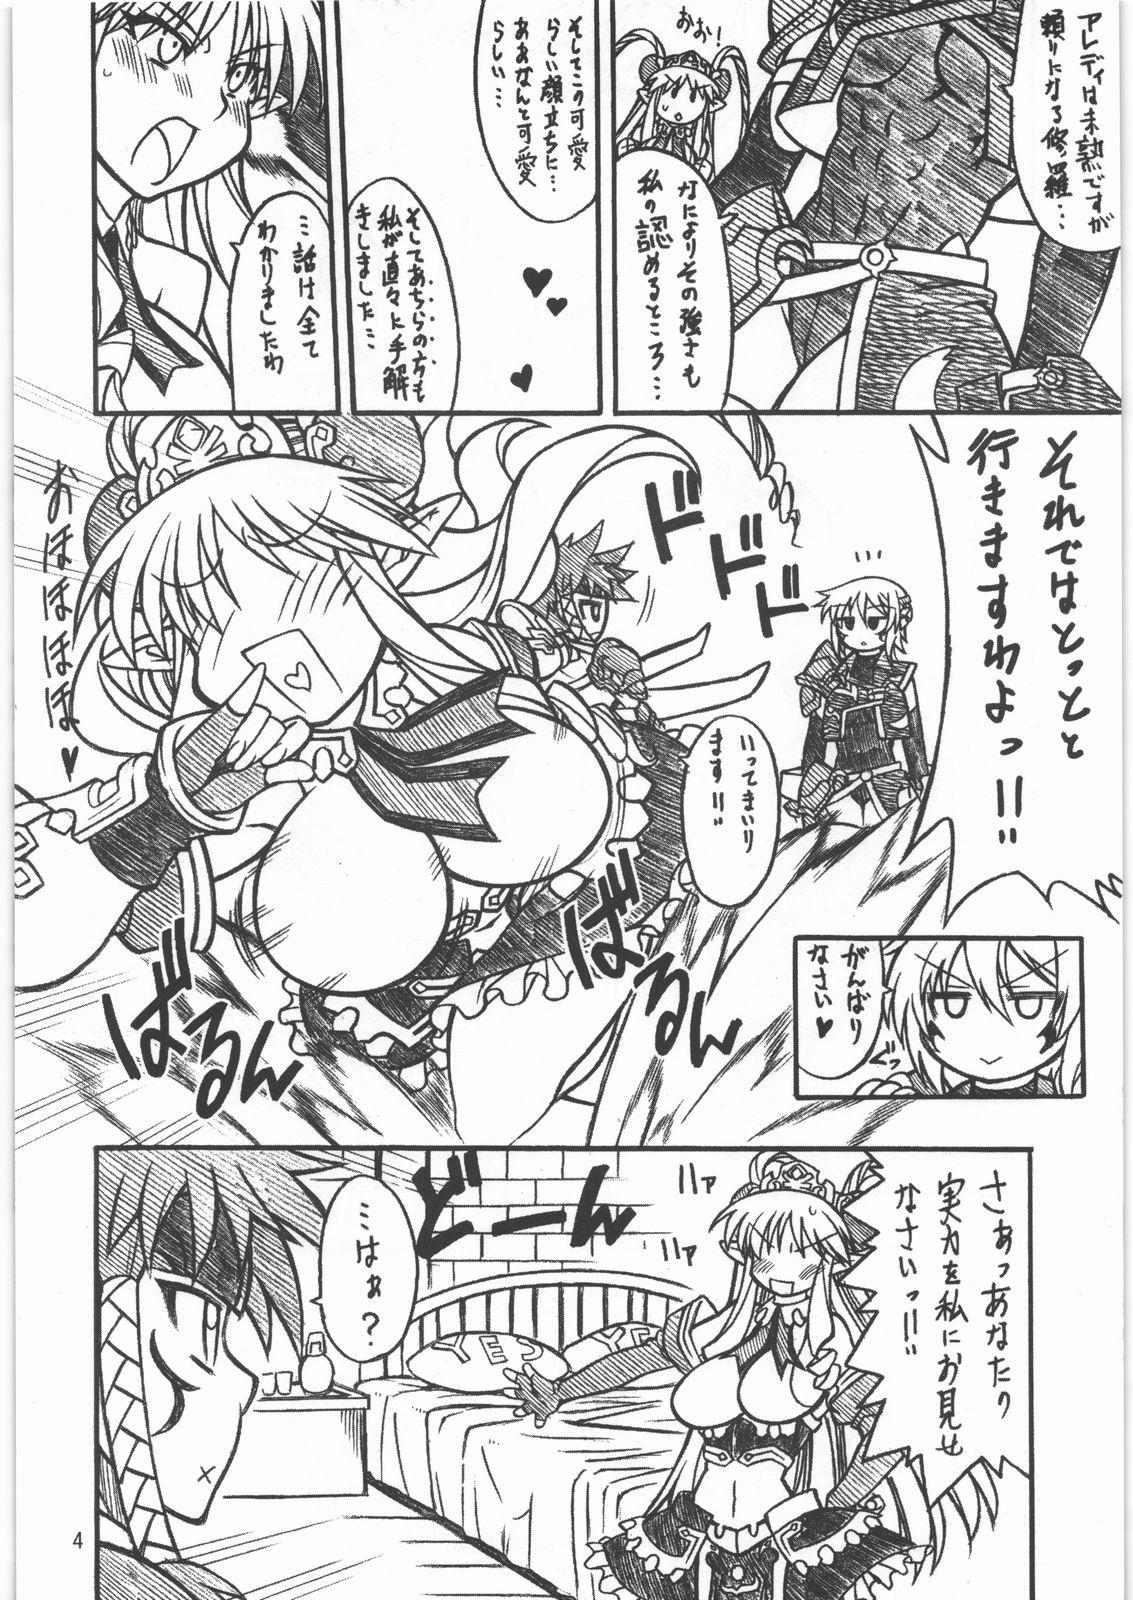 Kissing Midara Hime EXCEED - Super robot wars Endless frontier Trio - Page 3